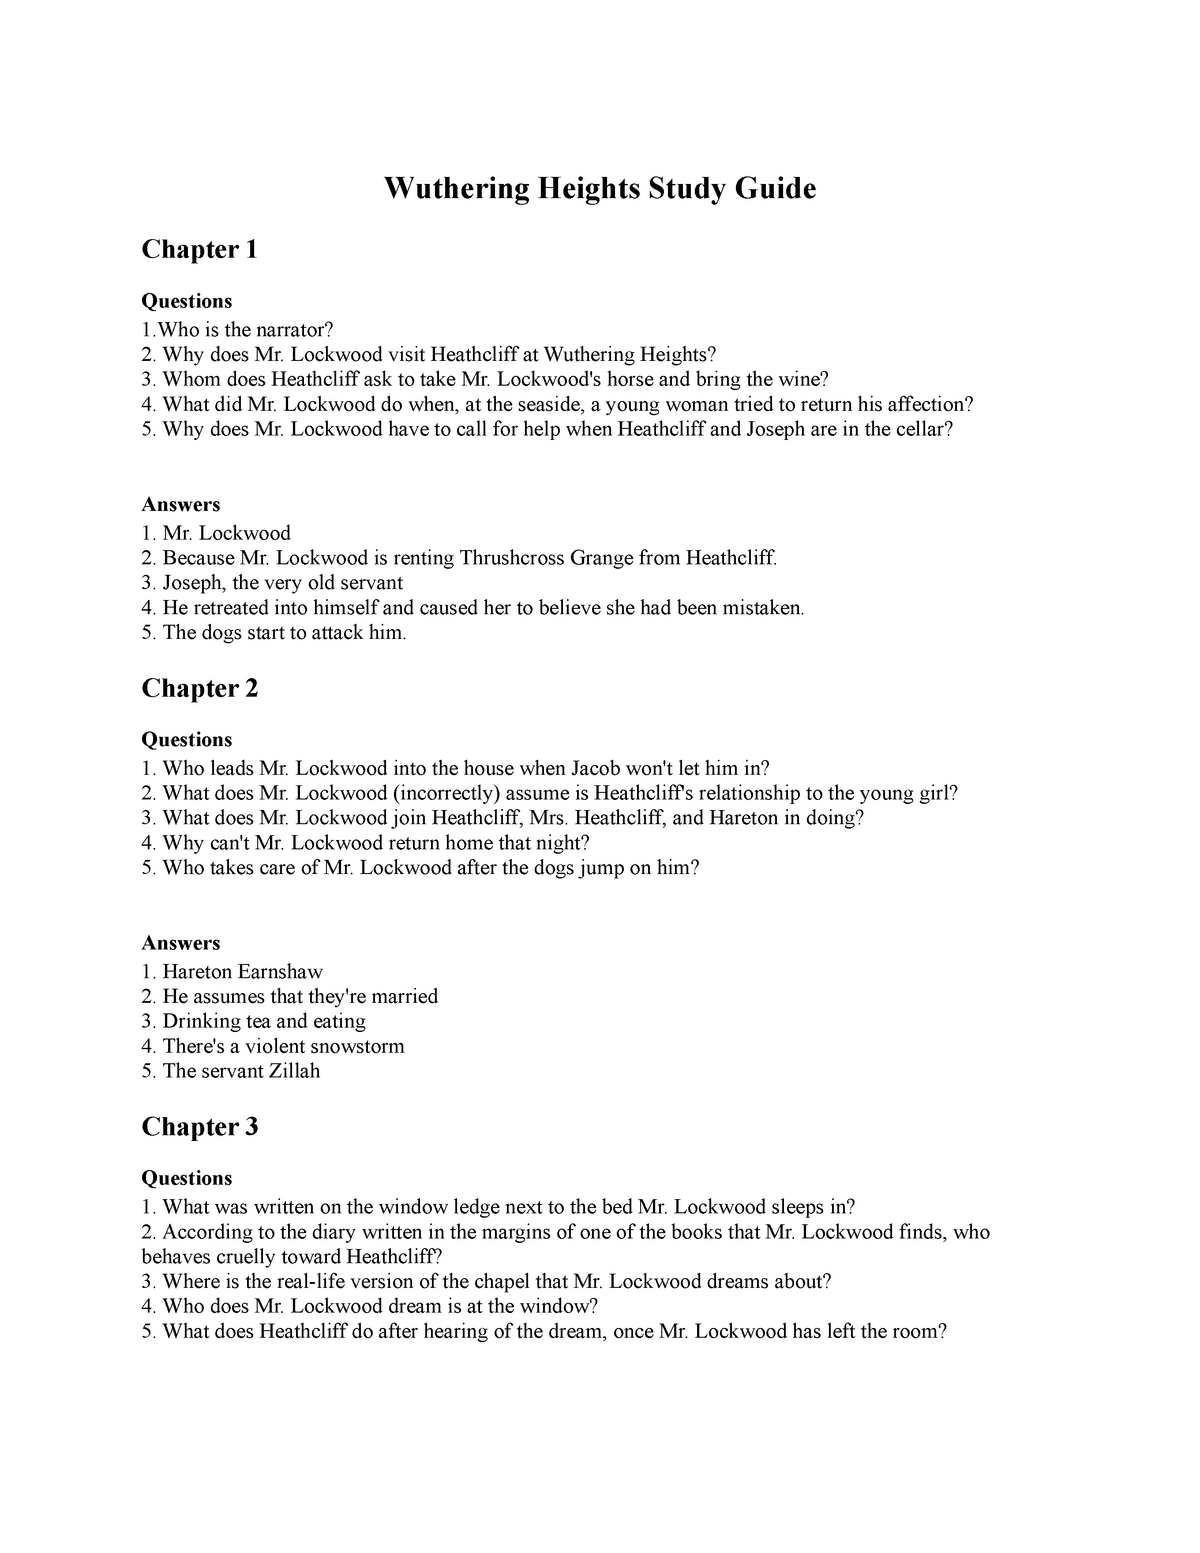 wuthering heights coursework questions